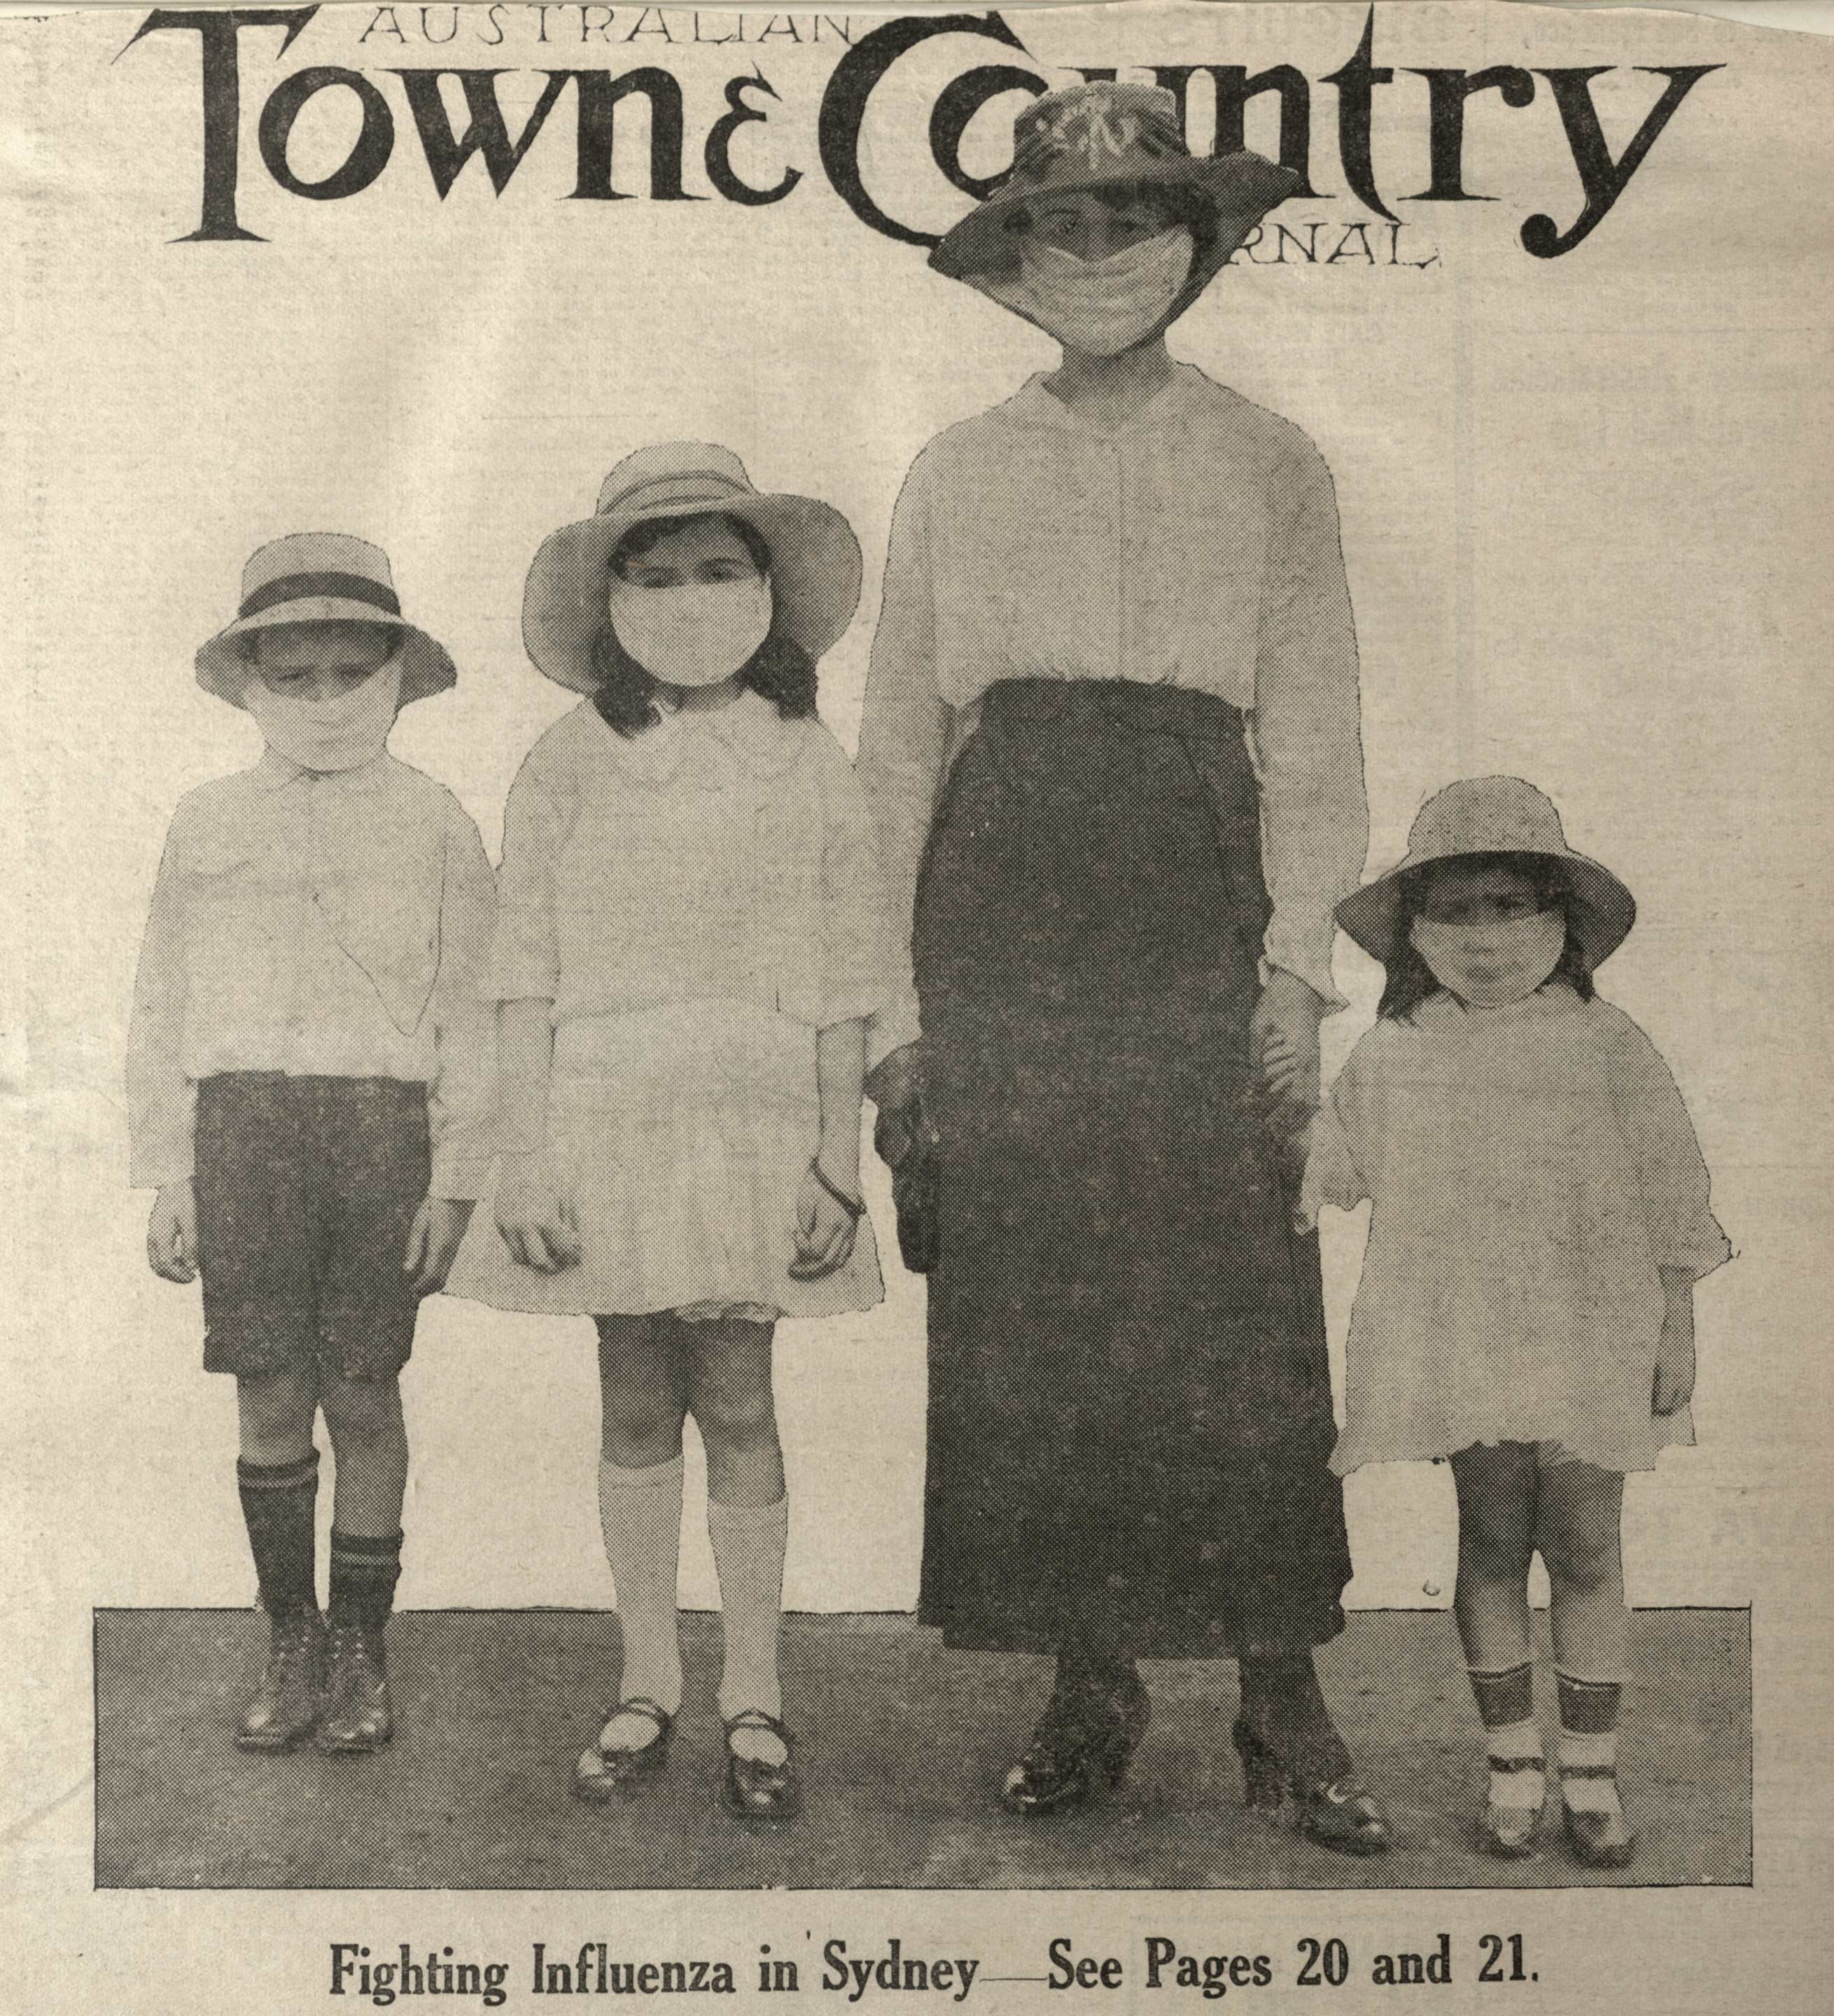 Cover of the Australian Town and Country Journal during the Spanish flu pandemic